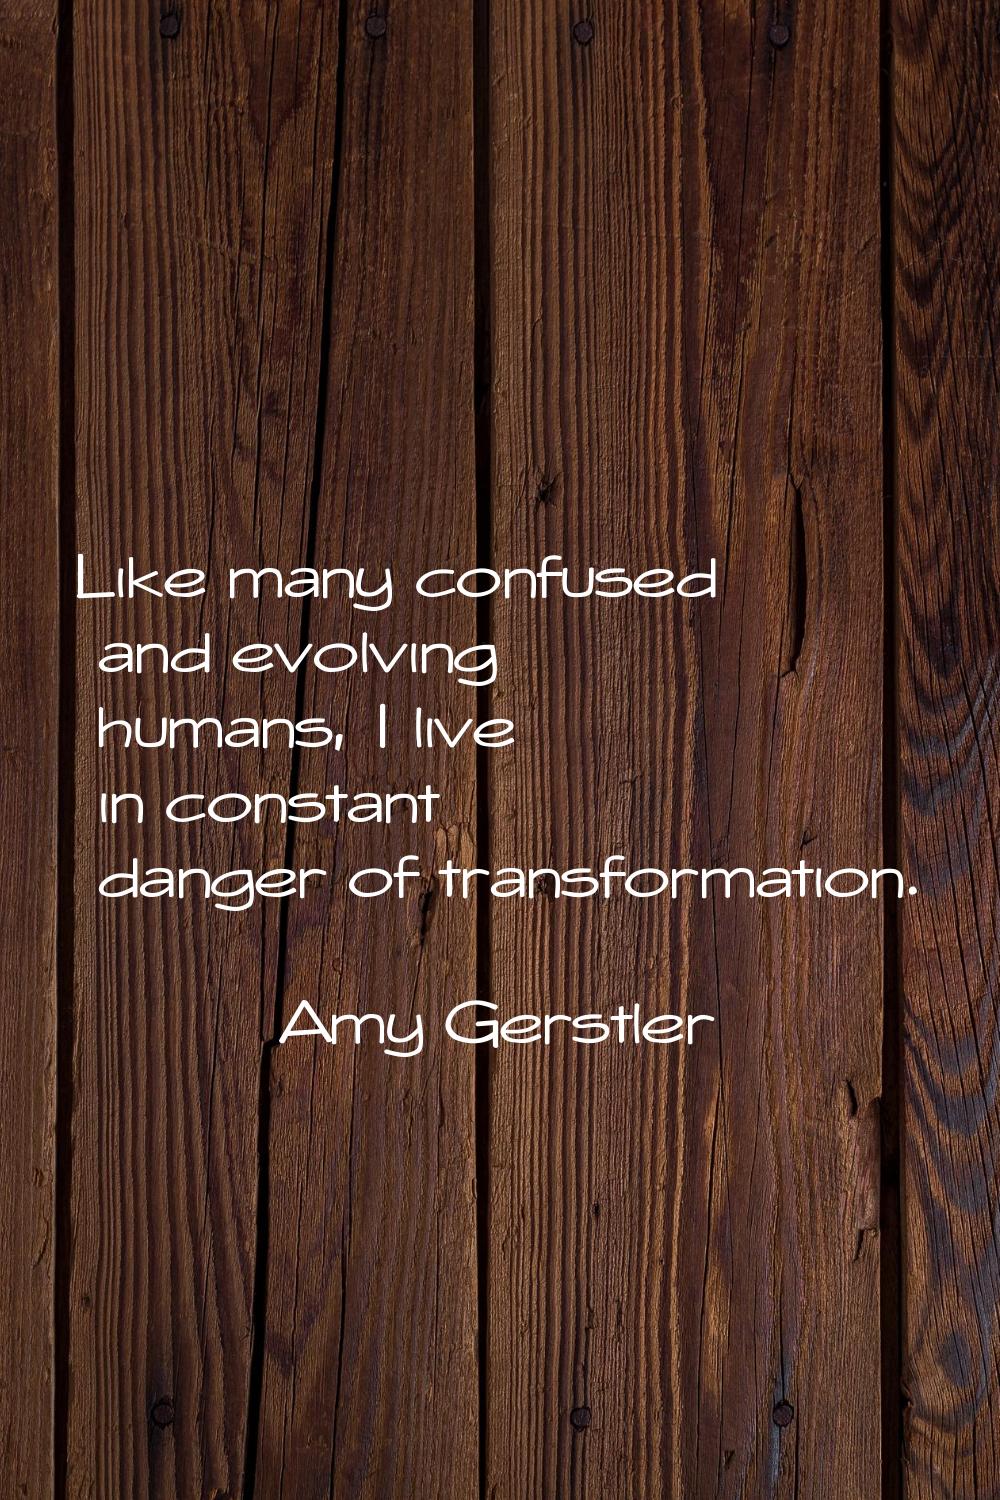 Like many confused and evolving humans, I live in constant danger of transformation.